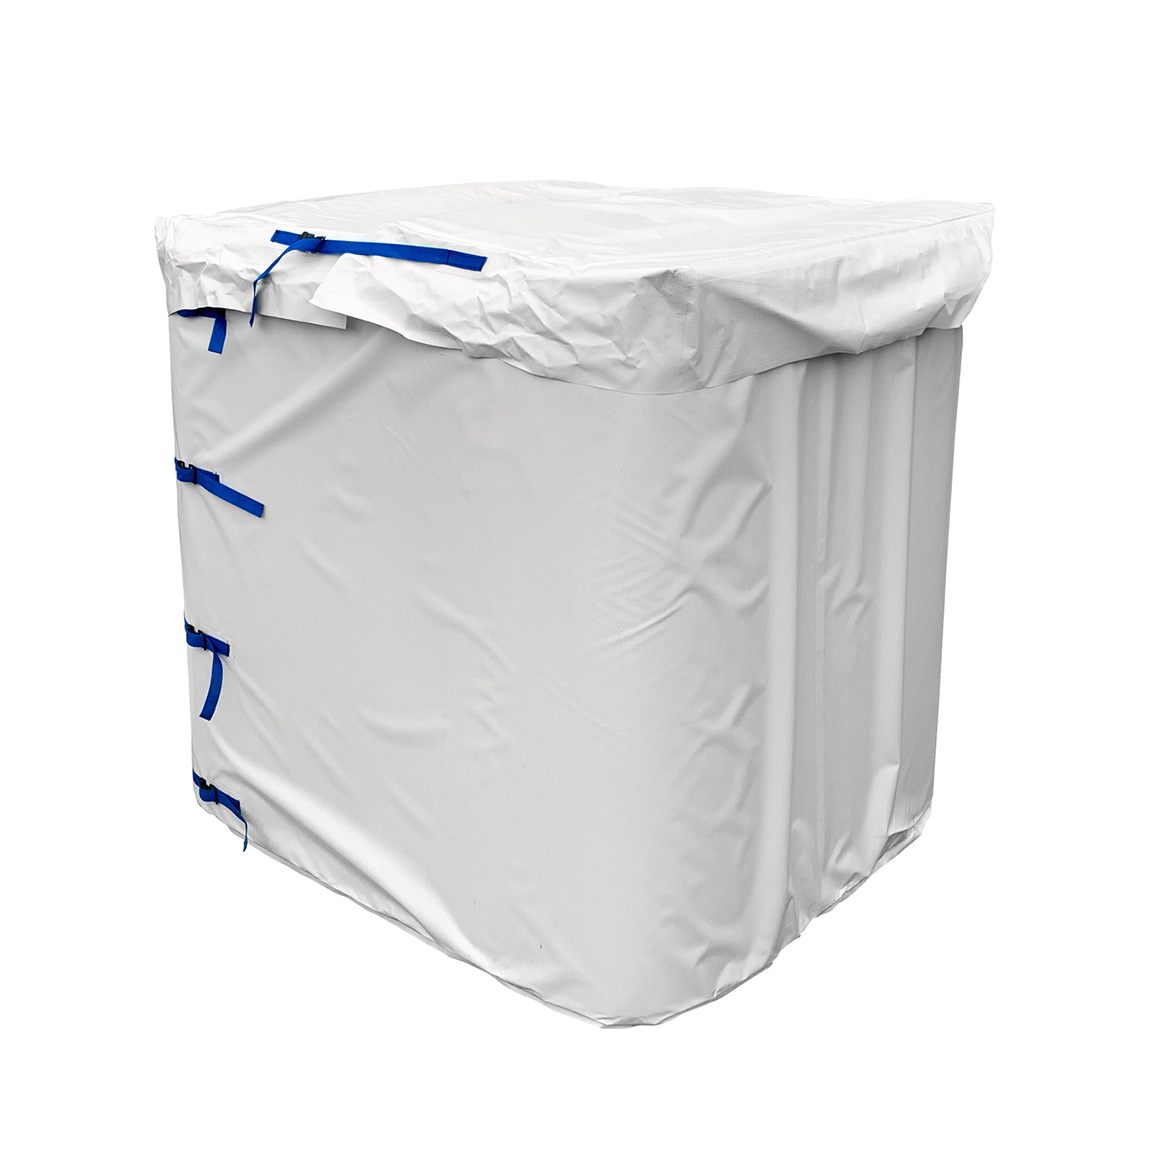 Fluxwrap IBC Cooling System (FLUX275) Achieve full coverage cooling at the temperature range you require to maintain the integrity of your critical materials with maximum efficiency. Available from Speedcrete, United Kingdom.